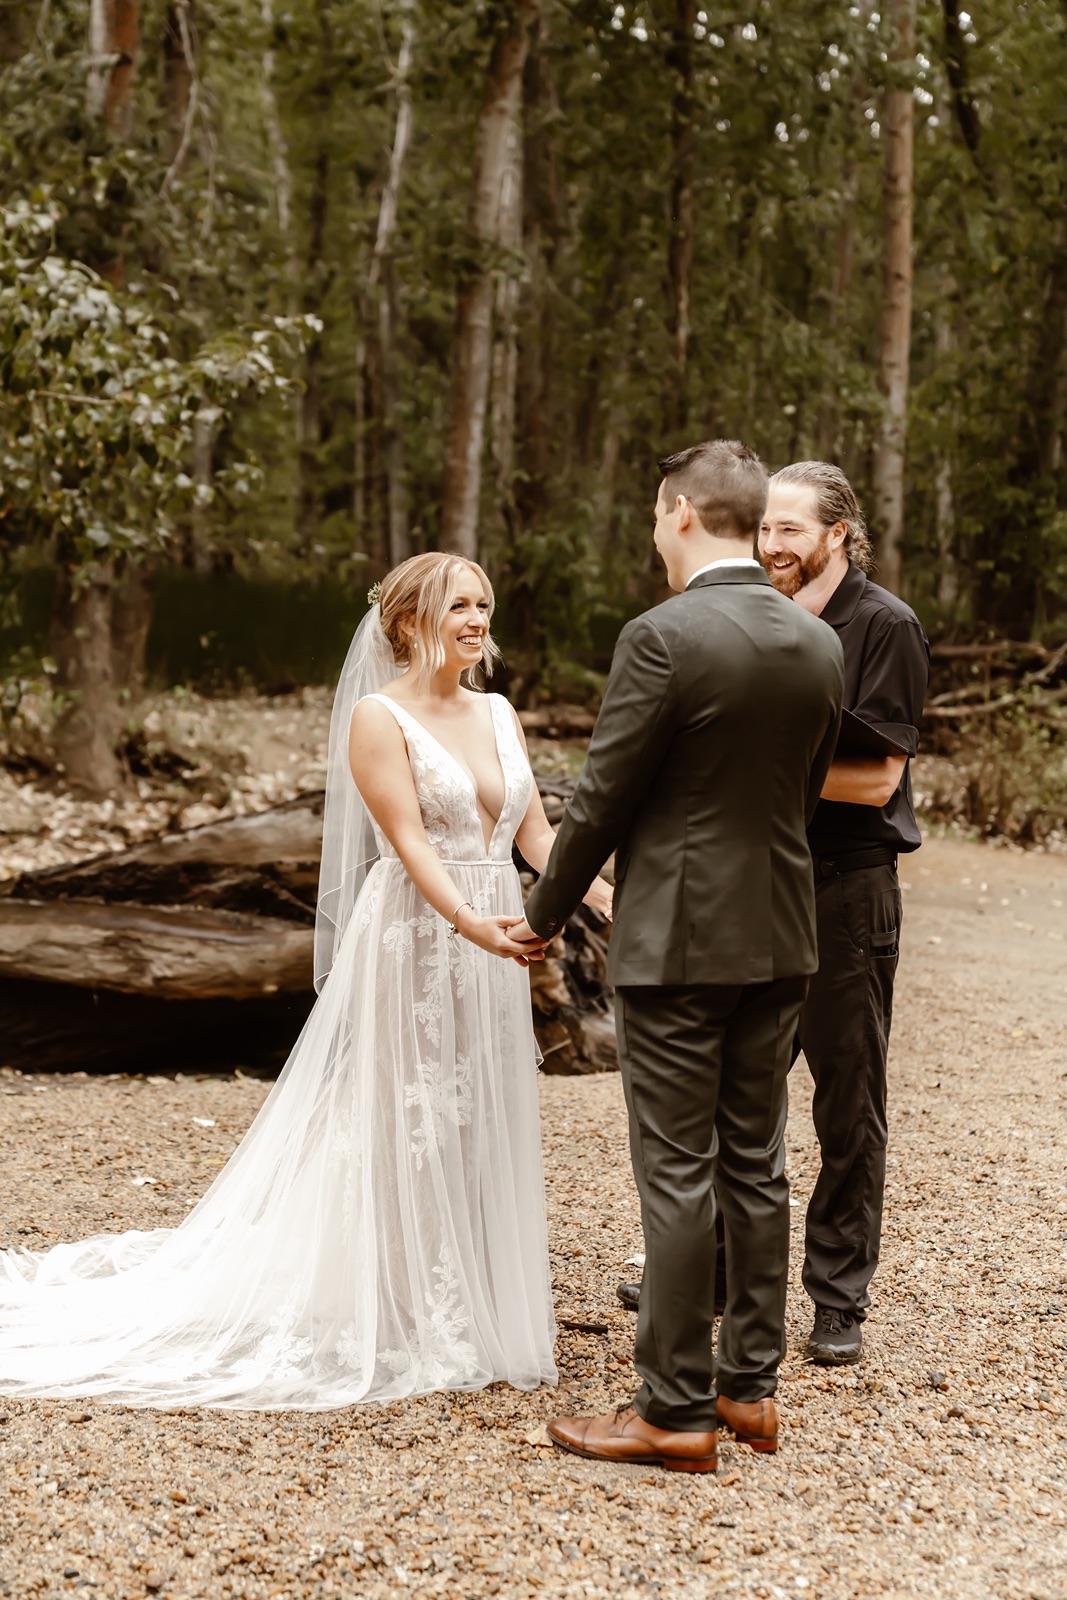 Bride and groom say vows at their intimate Yosemite wedding